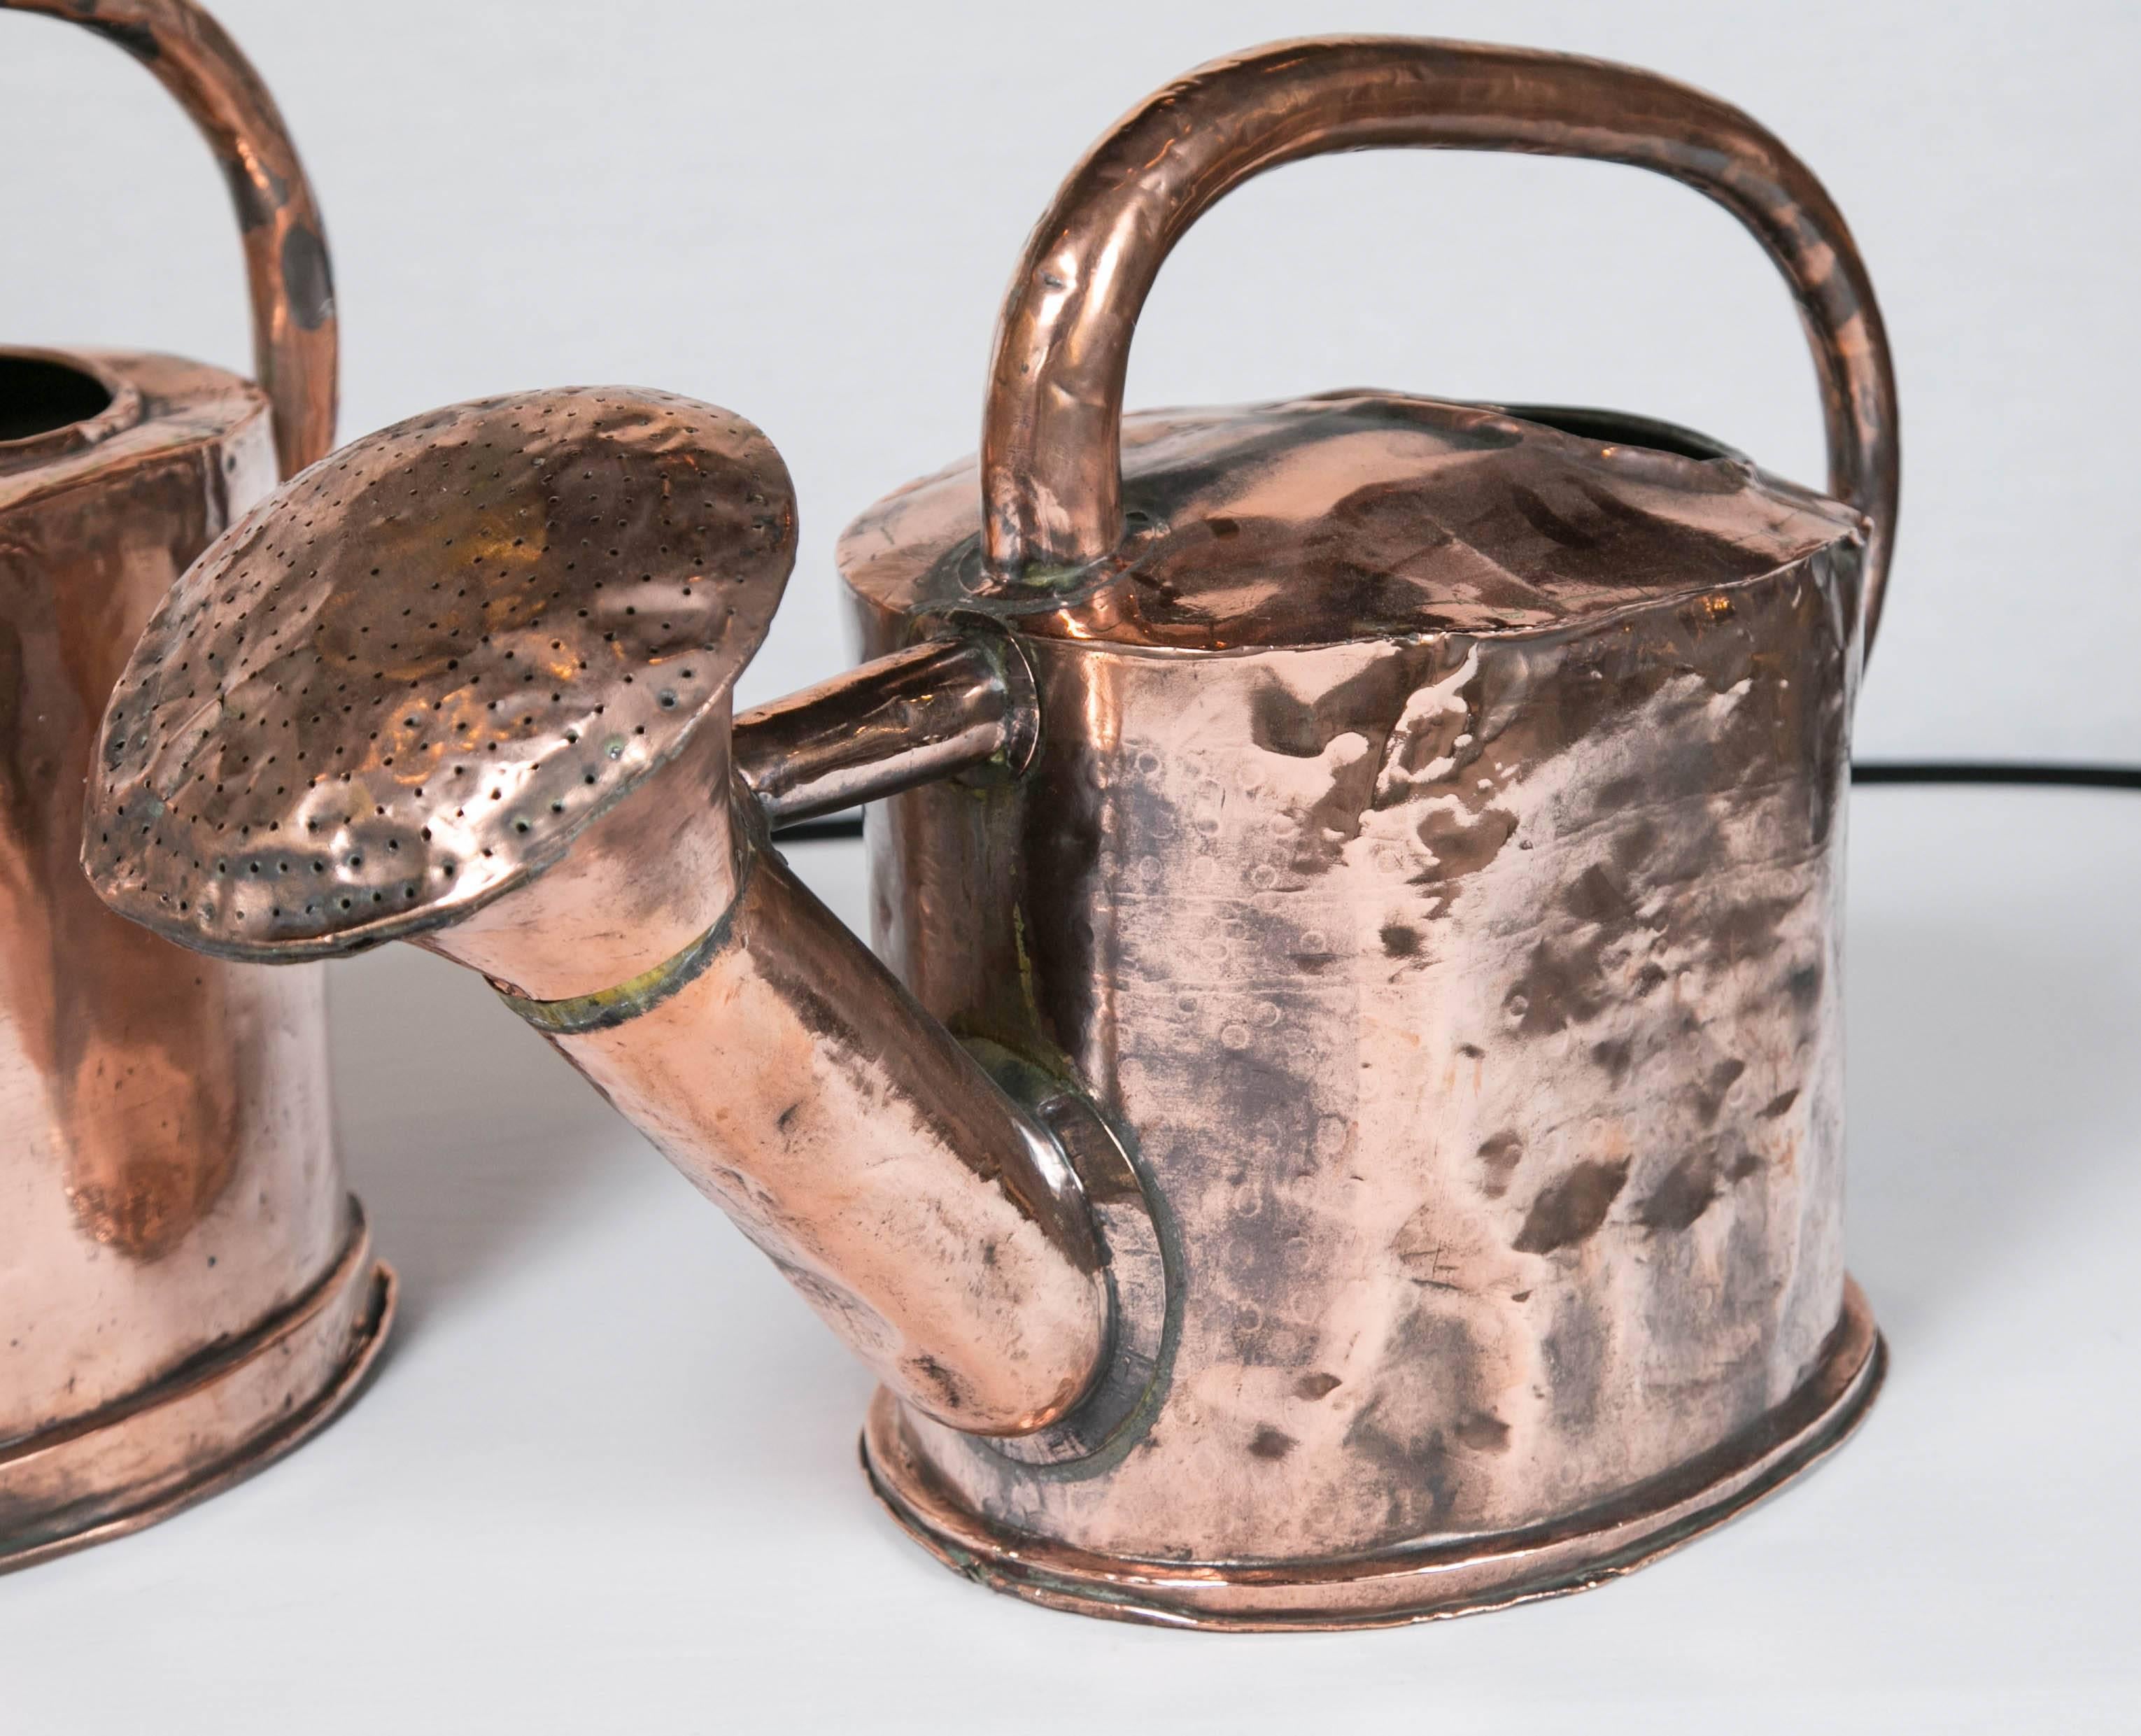 Three fabulous French watering cans, circa 18th century. Each slightly different size.
Available as a set or each $1750 each.